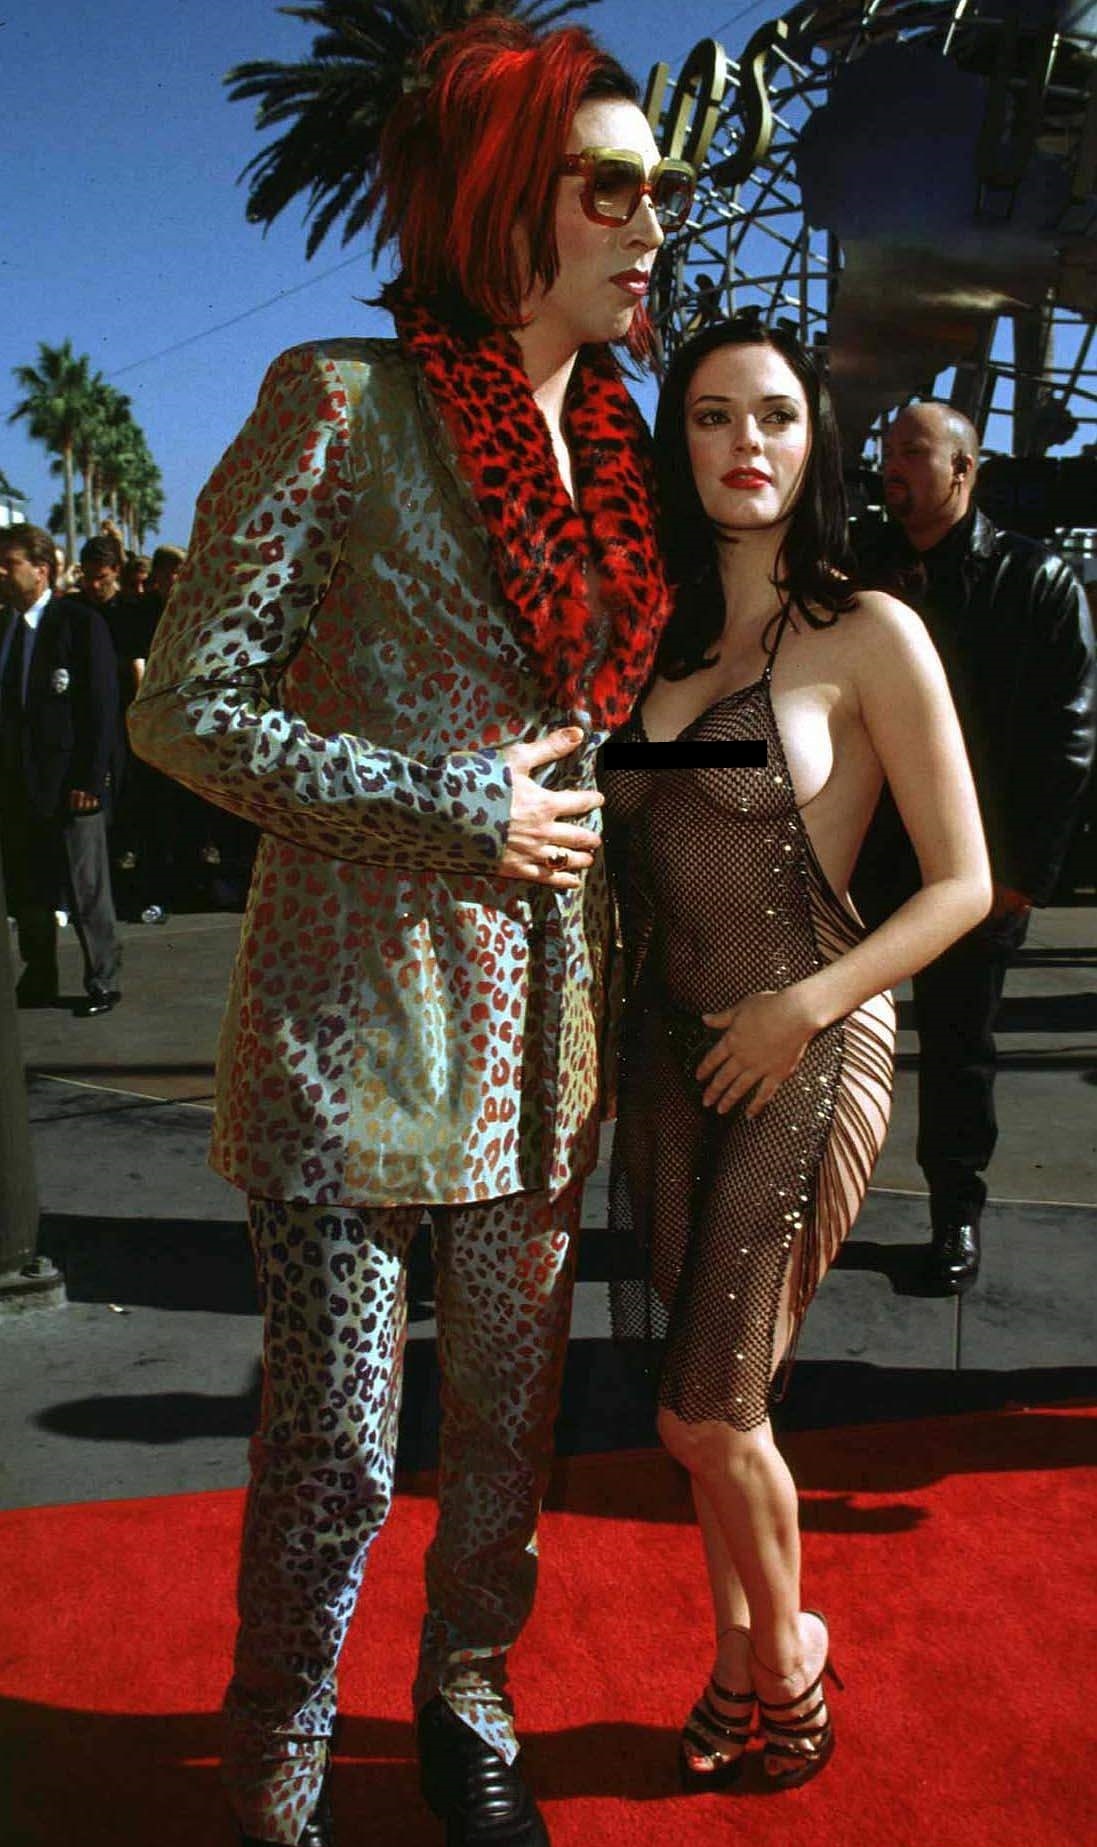 Marilyn Manson and his then girlfriend Rose McGowan arrive for the VMAs in 1998. McGowen was starting to make a name for herself as an actress when she showed up practically naked to a televised music awards show. Virtually her entire exposed ass and completely see through dress made major headlines at the time and shocked the other attendees.